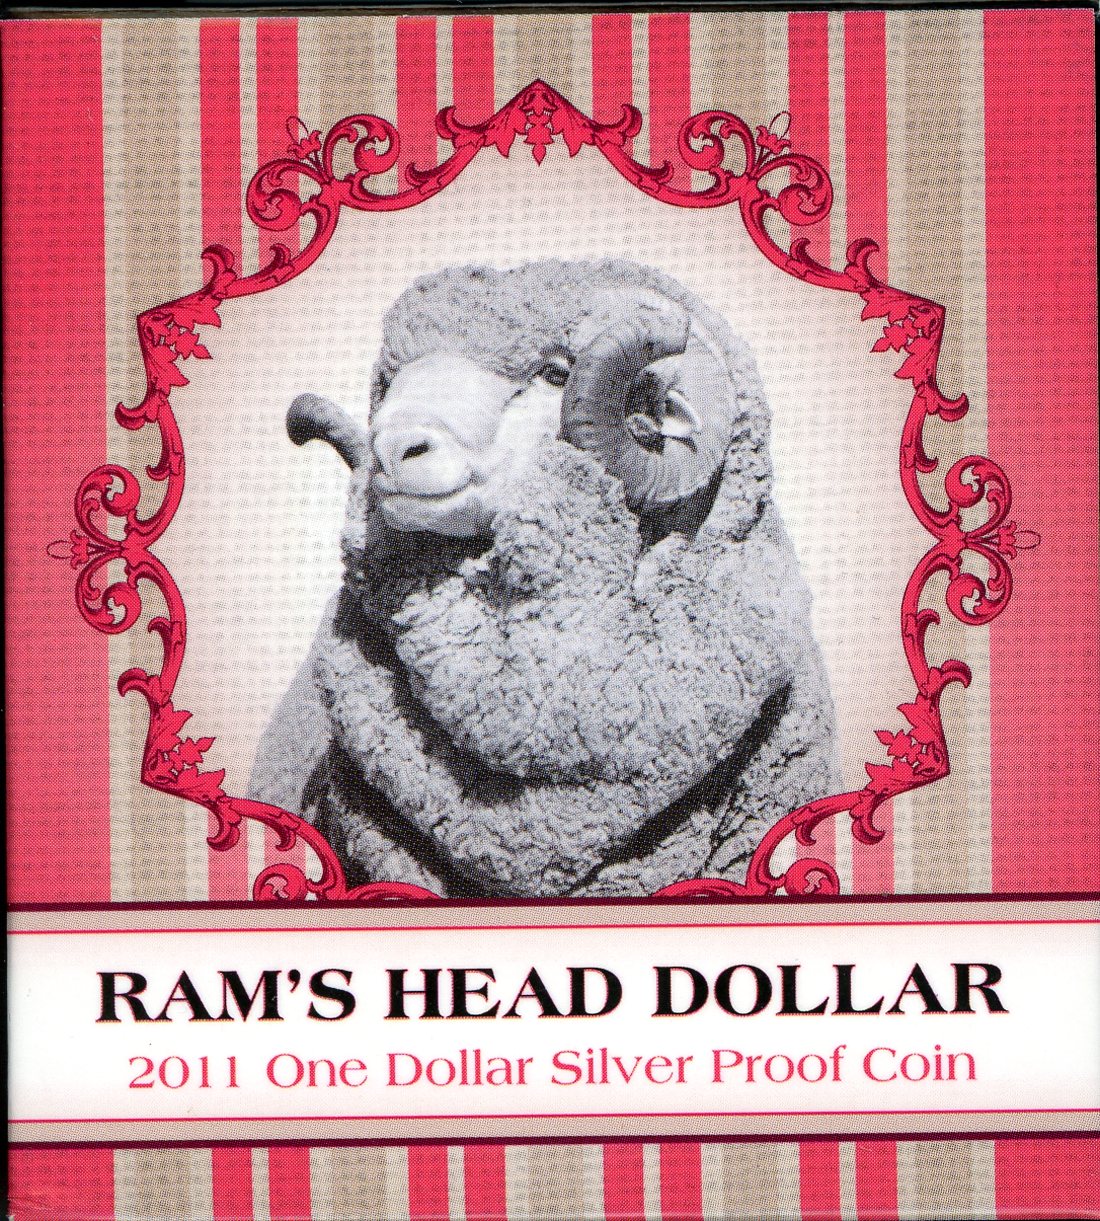 Thumbnail for 2011 $1 Silver Proof Coin - Rams Head